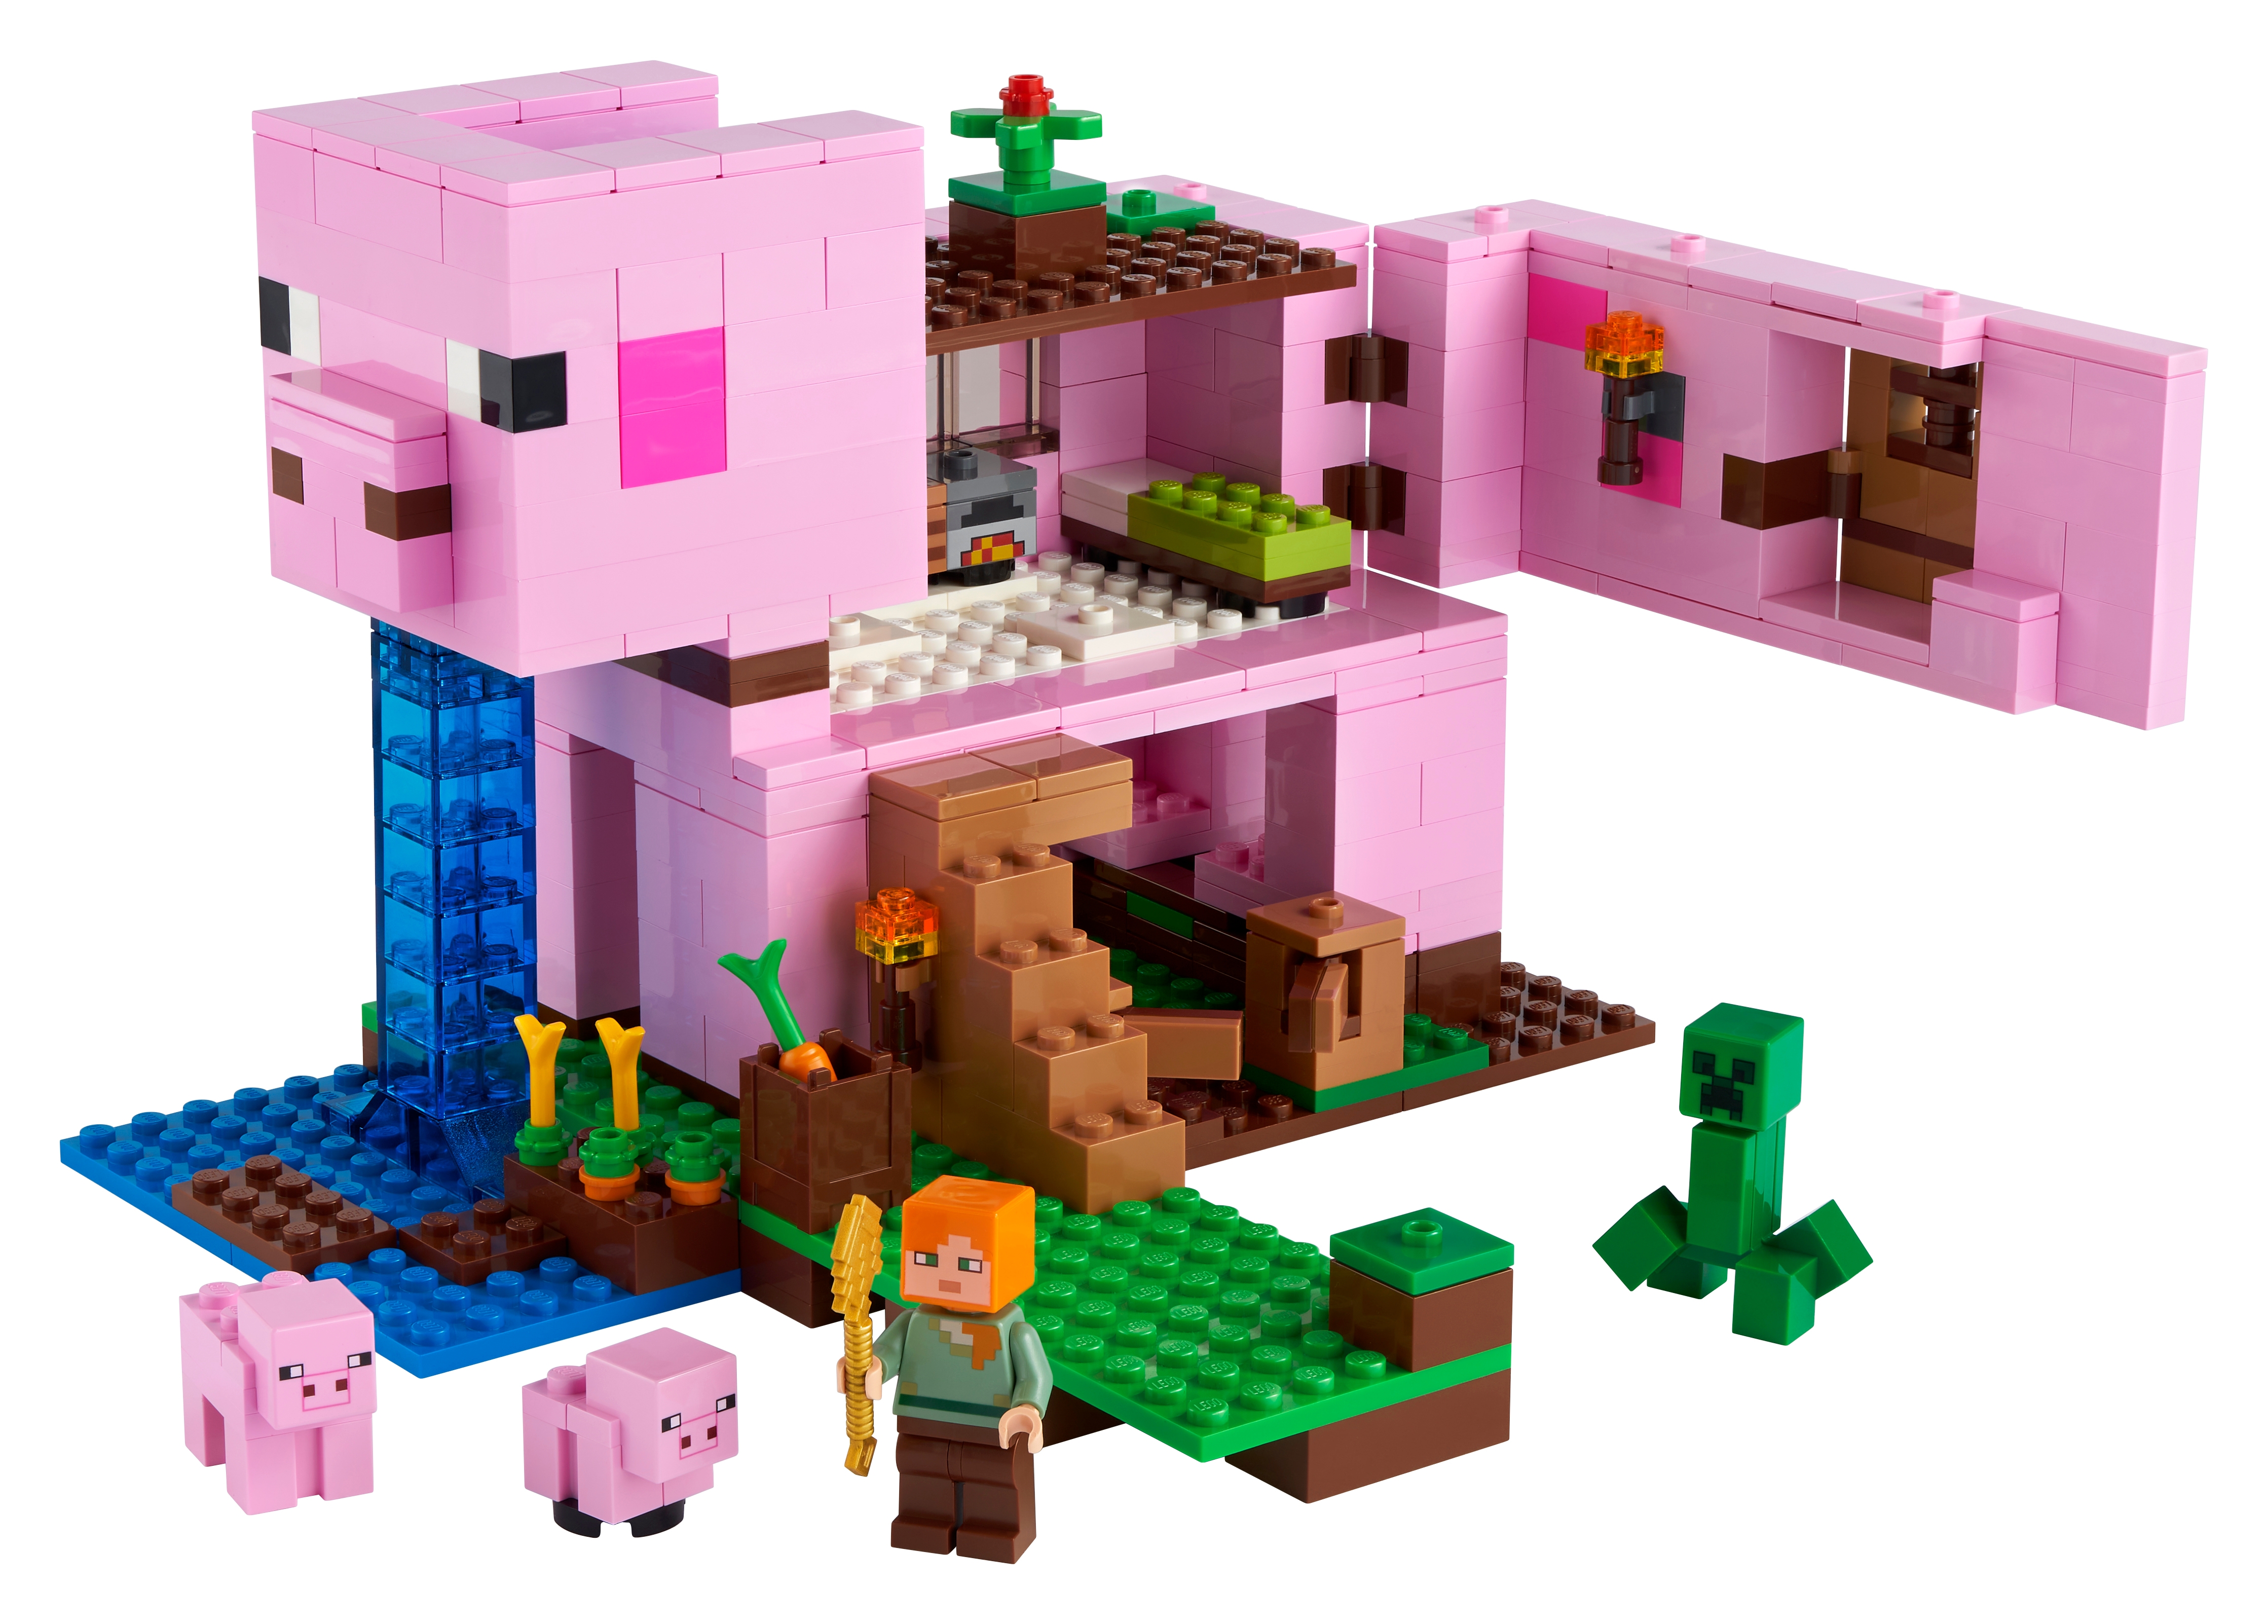 The Pig House 21170 Minecraft® | Buy online at the Official LEGO® Shop US